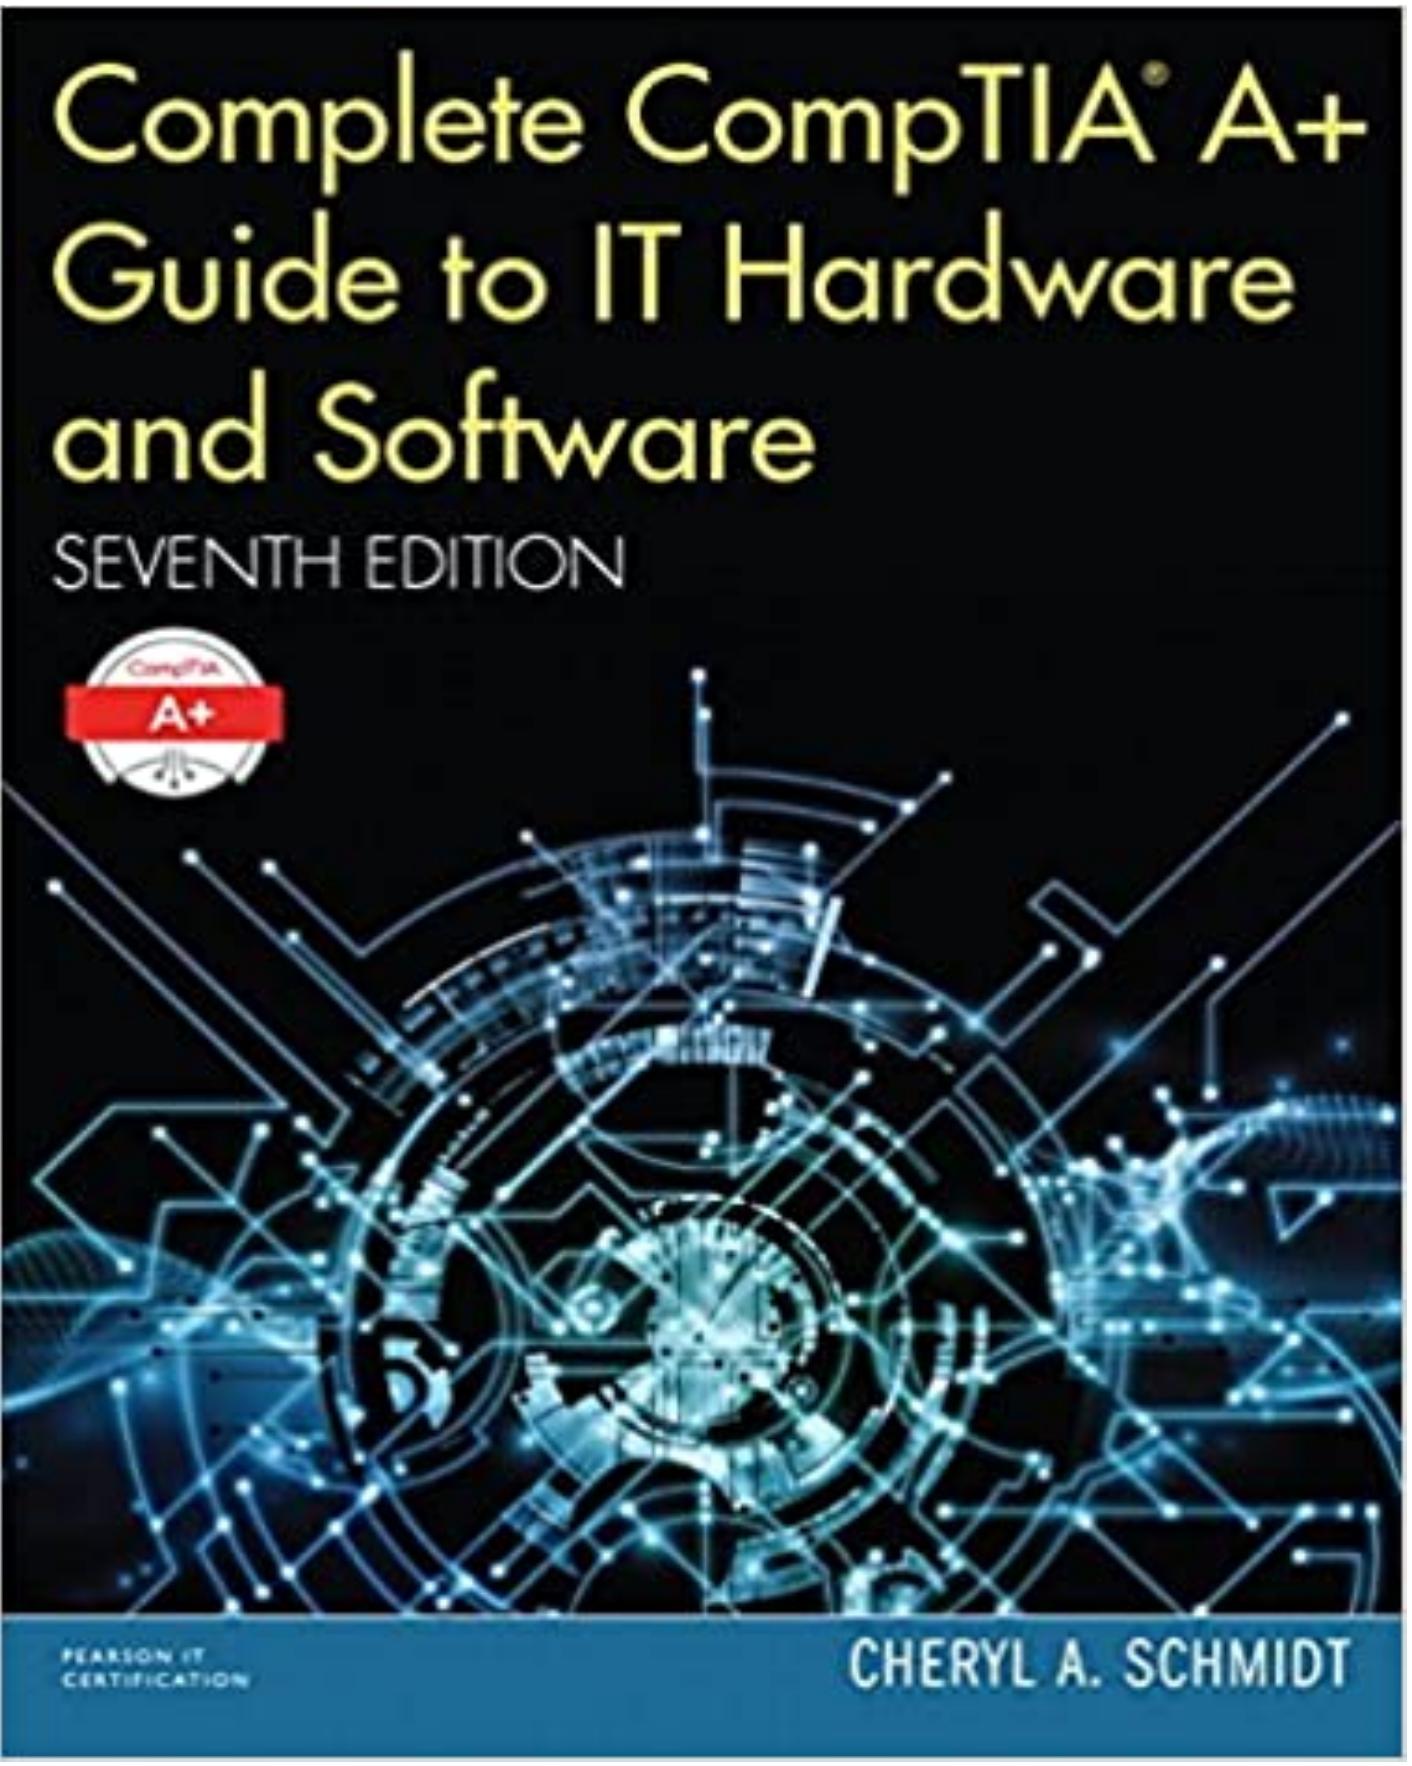 (eBook PDF)Complete CompTIA A+ Guide to IT Hardware and Software 7th Edition by Cheryl A. Schmidt